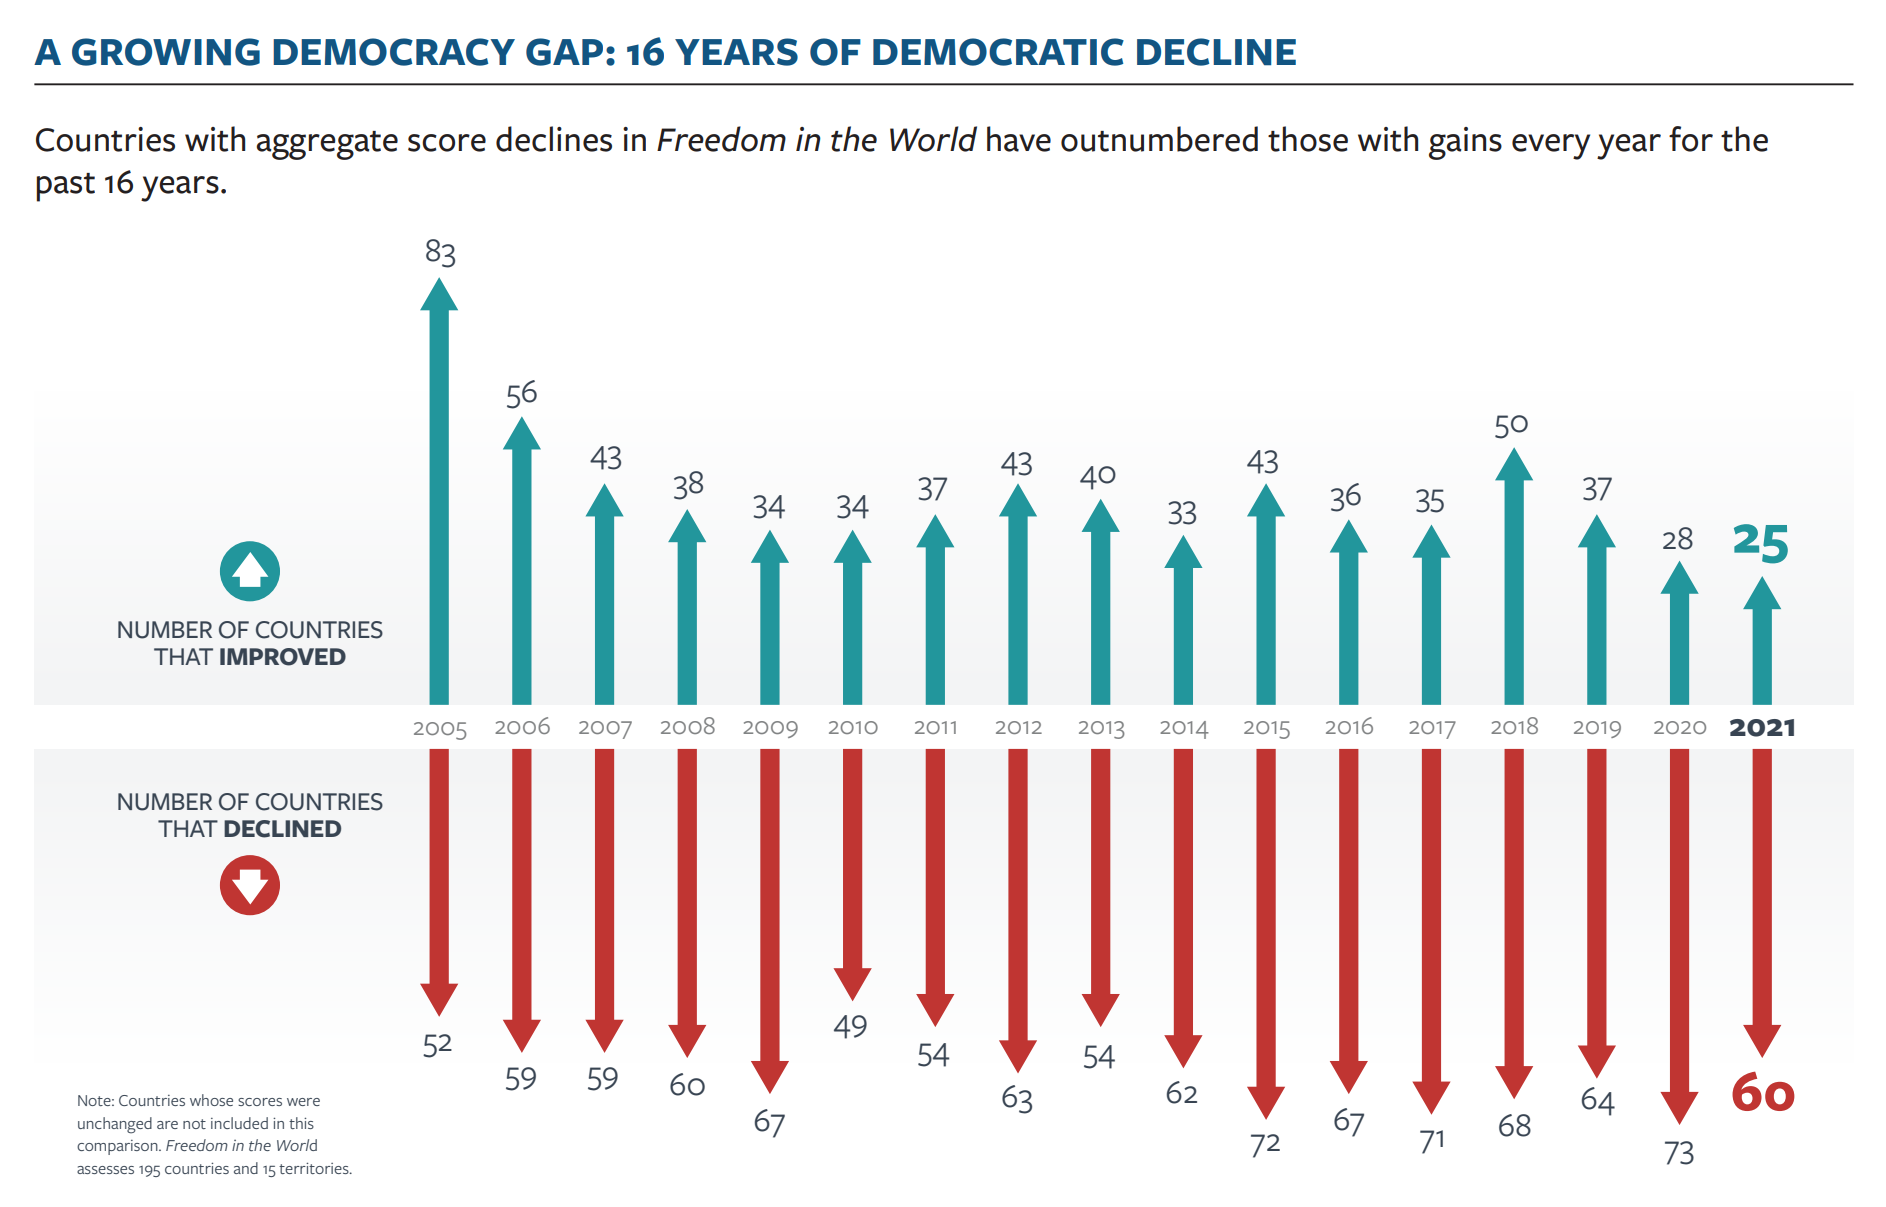 Aggregated democracy scores for countries that have experienced changes democratic governance, 2005-2021. Countries with aggregate score declines in the “Freedom in the World” report have outnumbered those with gains every year for the past 16 years. A total of 60 countries suffered declines over the past year, while only 25 improved. As of today, some 38 percent of the global population live in Not Free countries, the highest proportion since 1997. Only about 20 percent now live in Free countries. Graphic: Freedom House